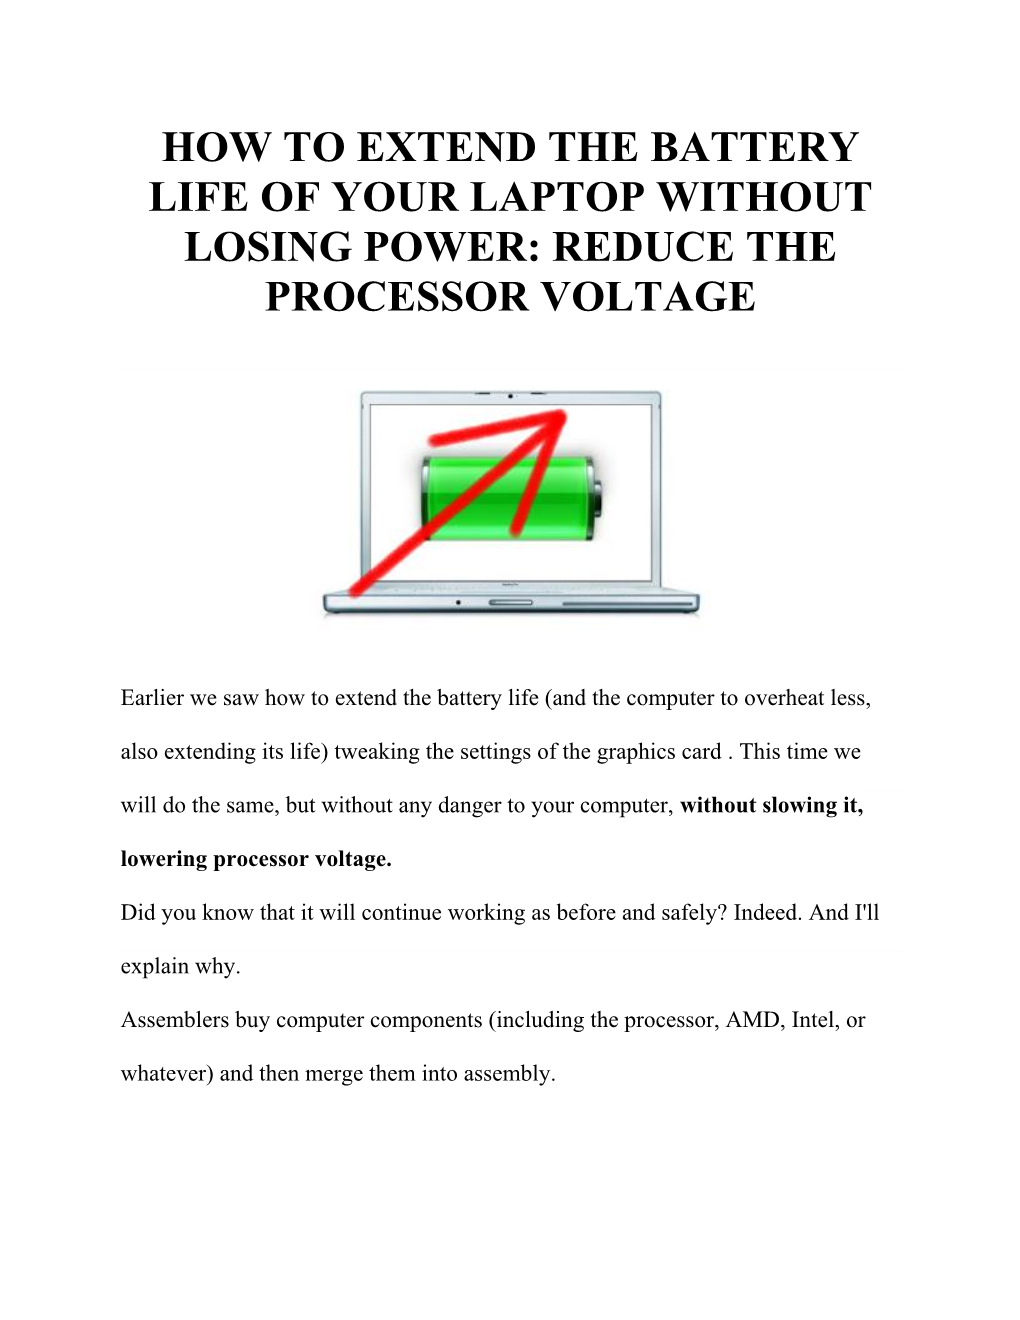 How to Extend the Battery Life of Your Laptop Without Losing Power: Reduce the Processor Voltage